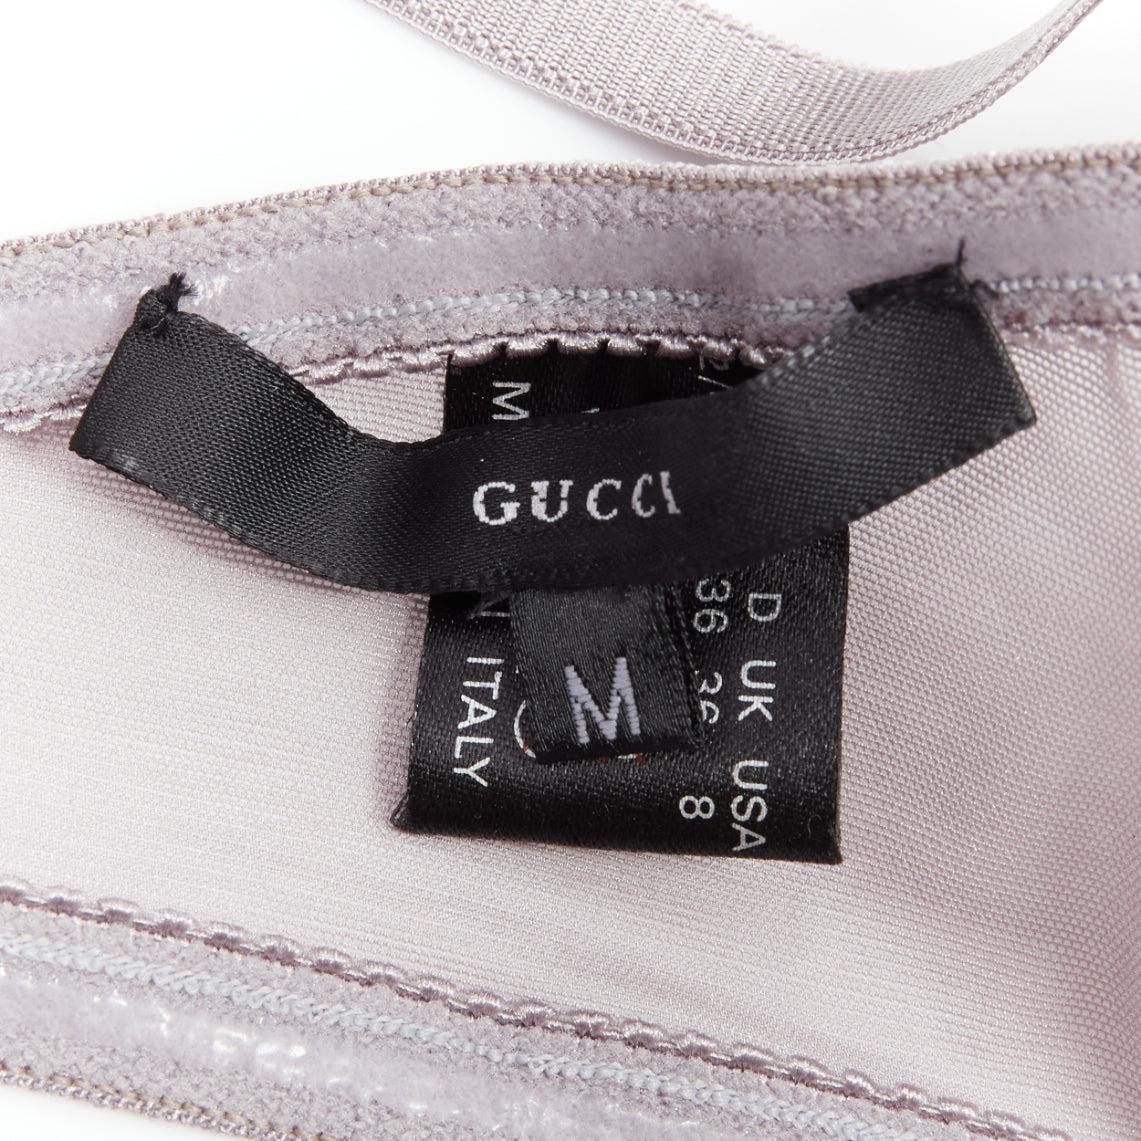 GUCCI Tom Ford 2001 Vintage grey nude mesh 3D cut cup fashion bra M For Sale 4